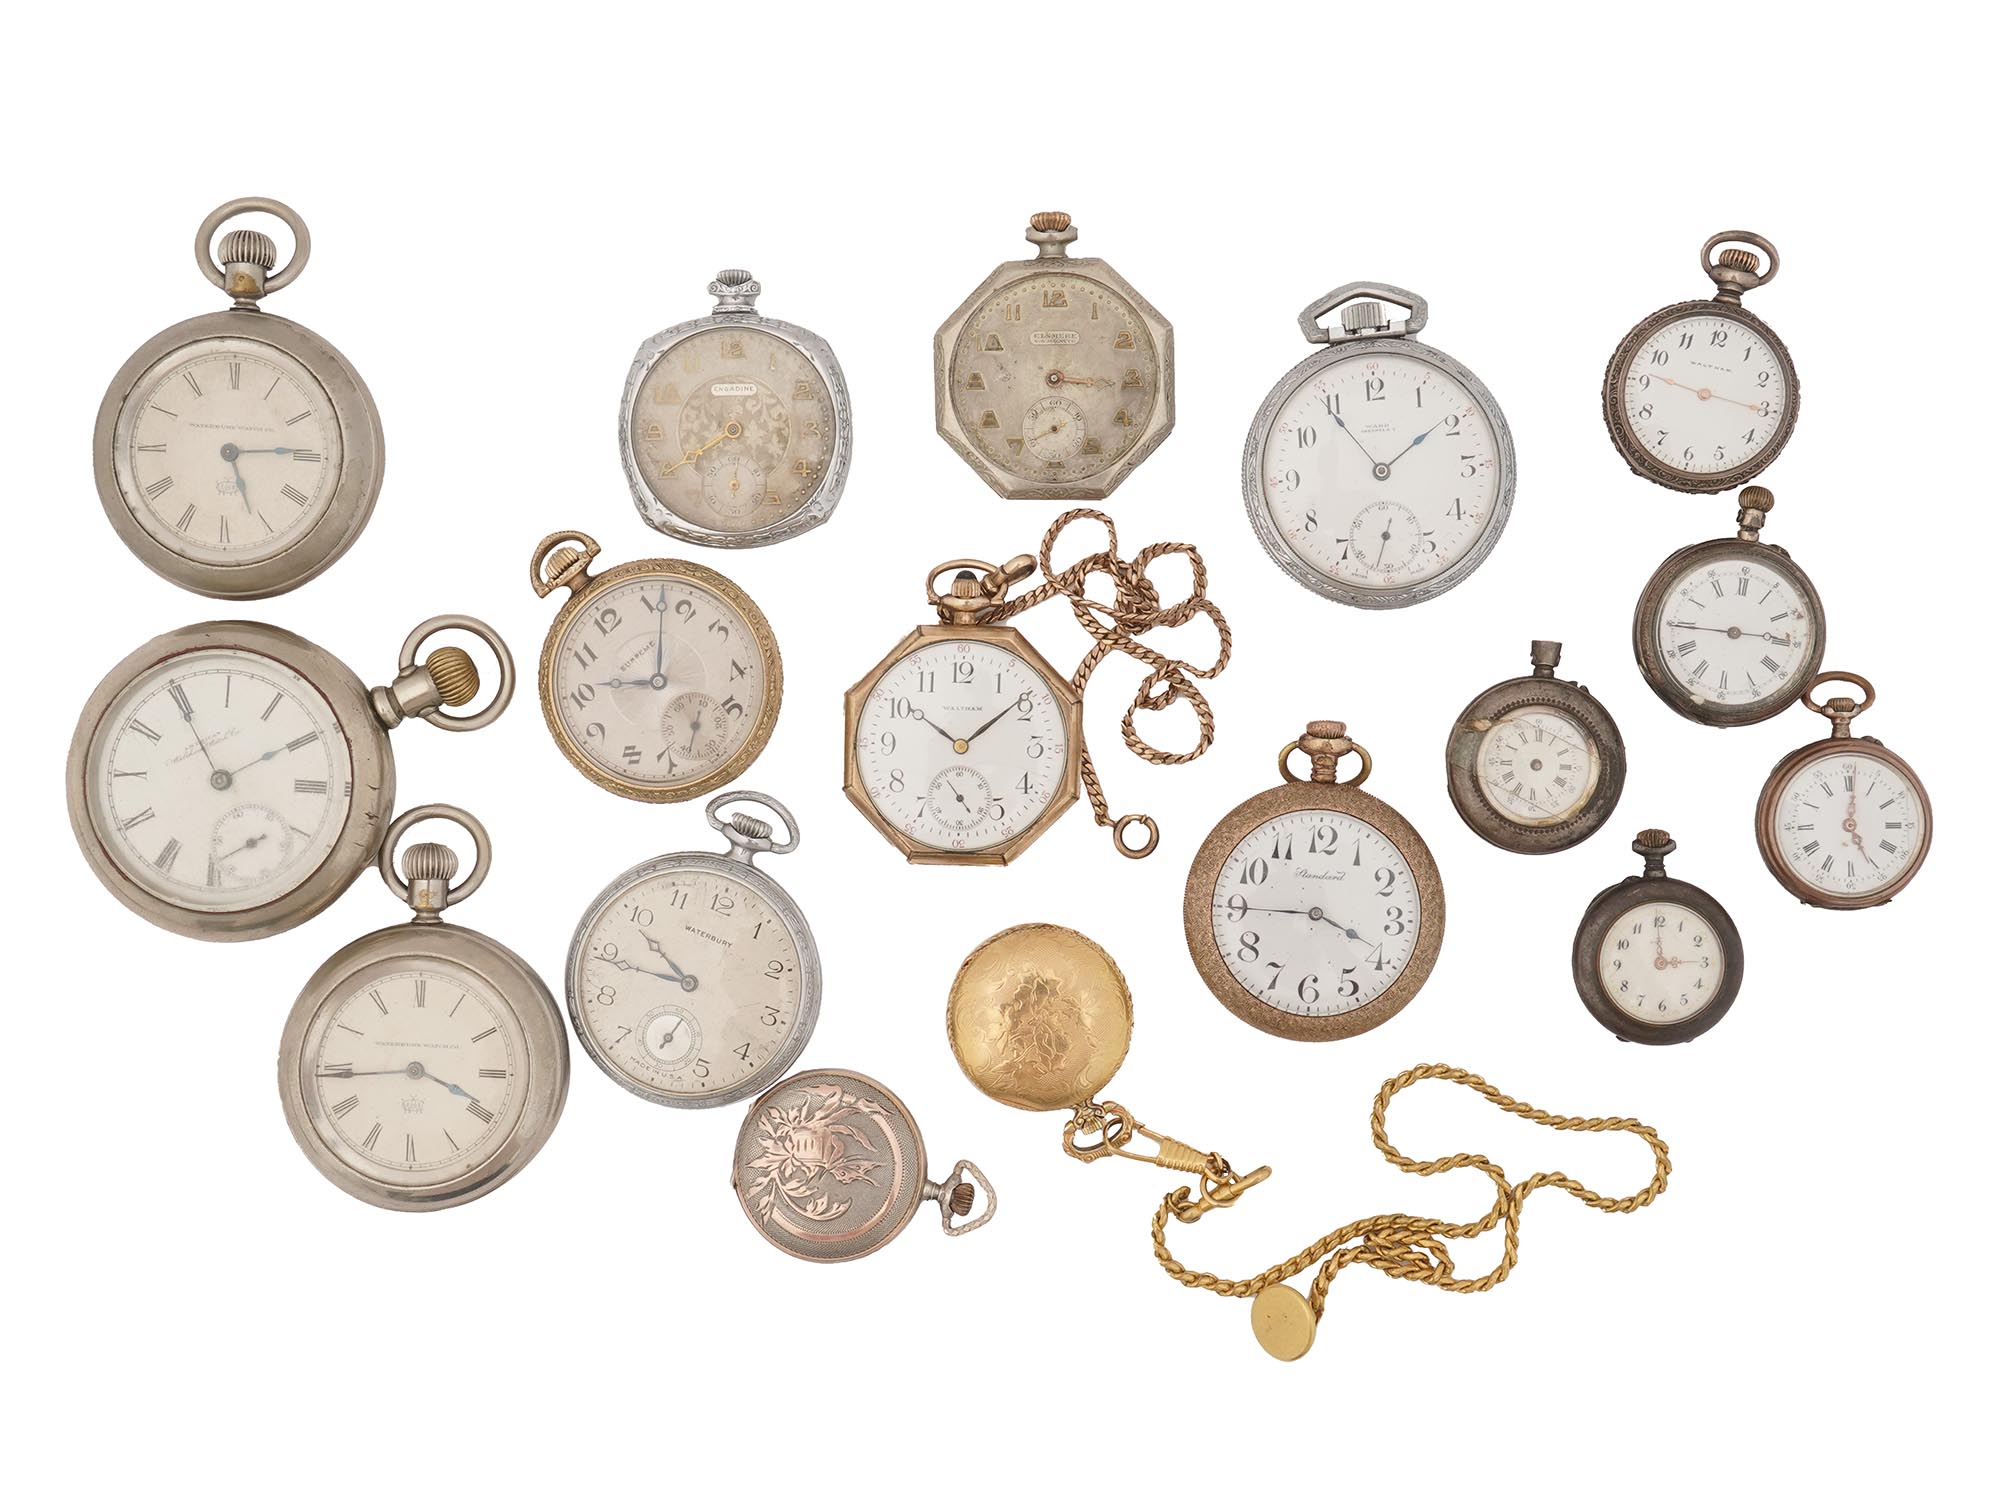 ANTIQUE AMERICAN POCKET WATCH COLLECTION PIC-0